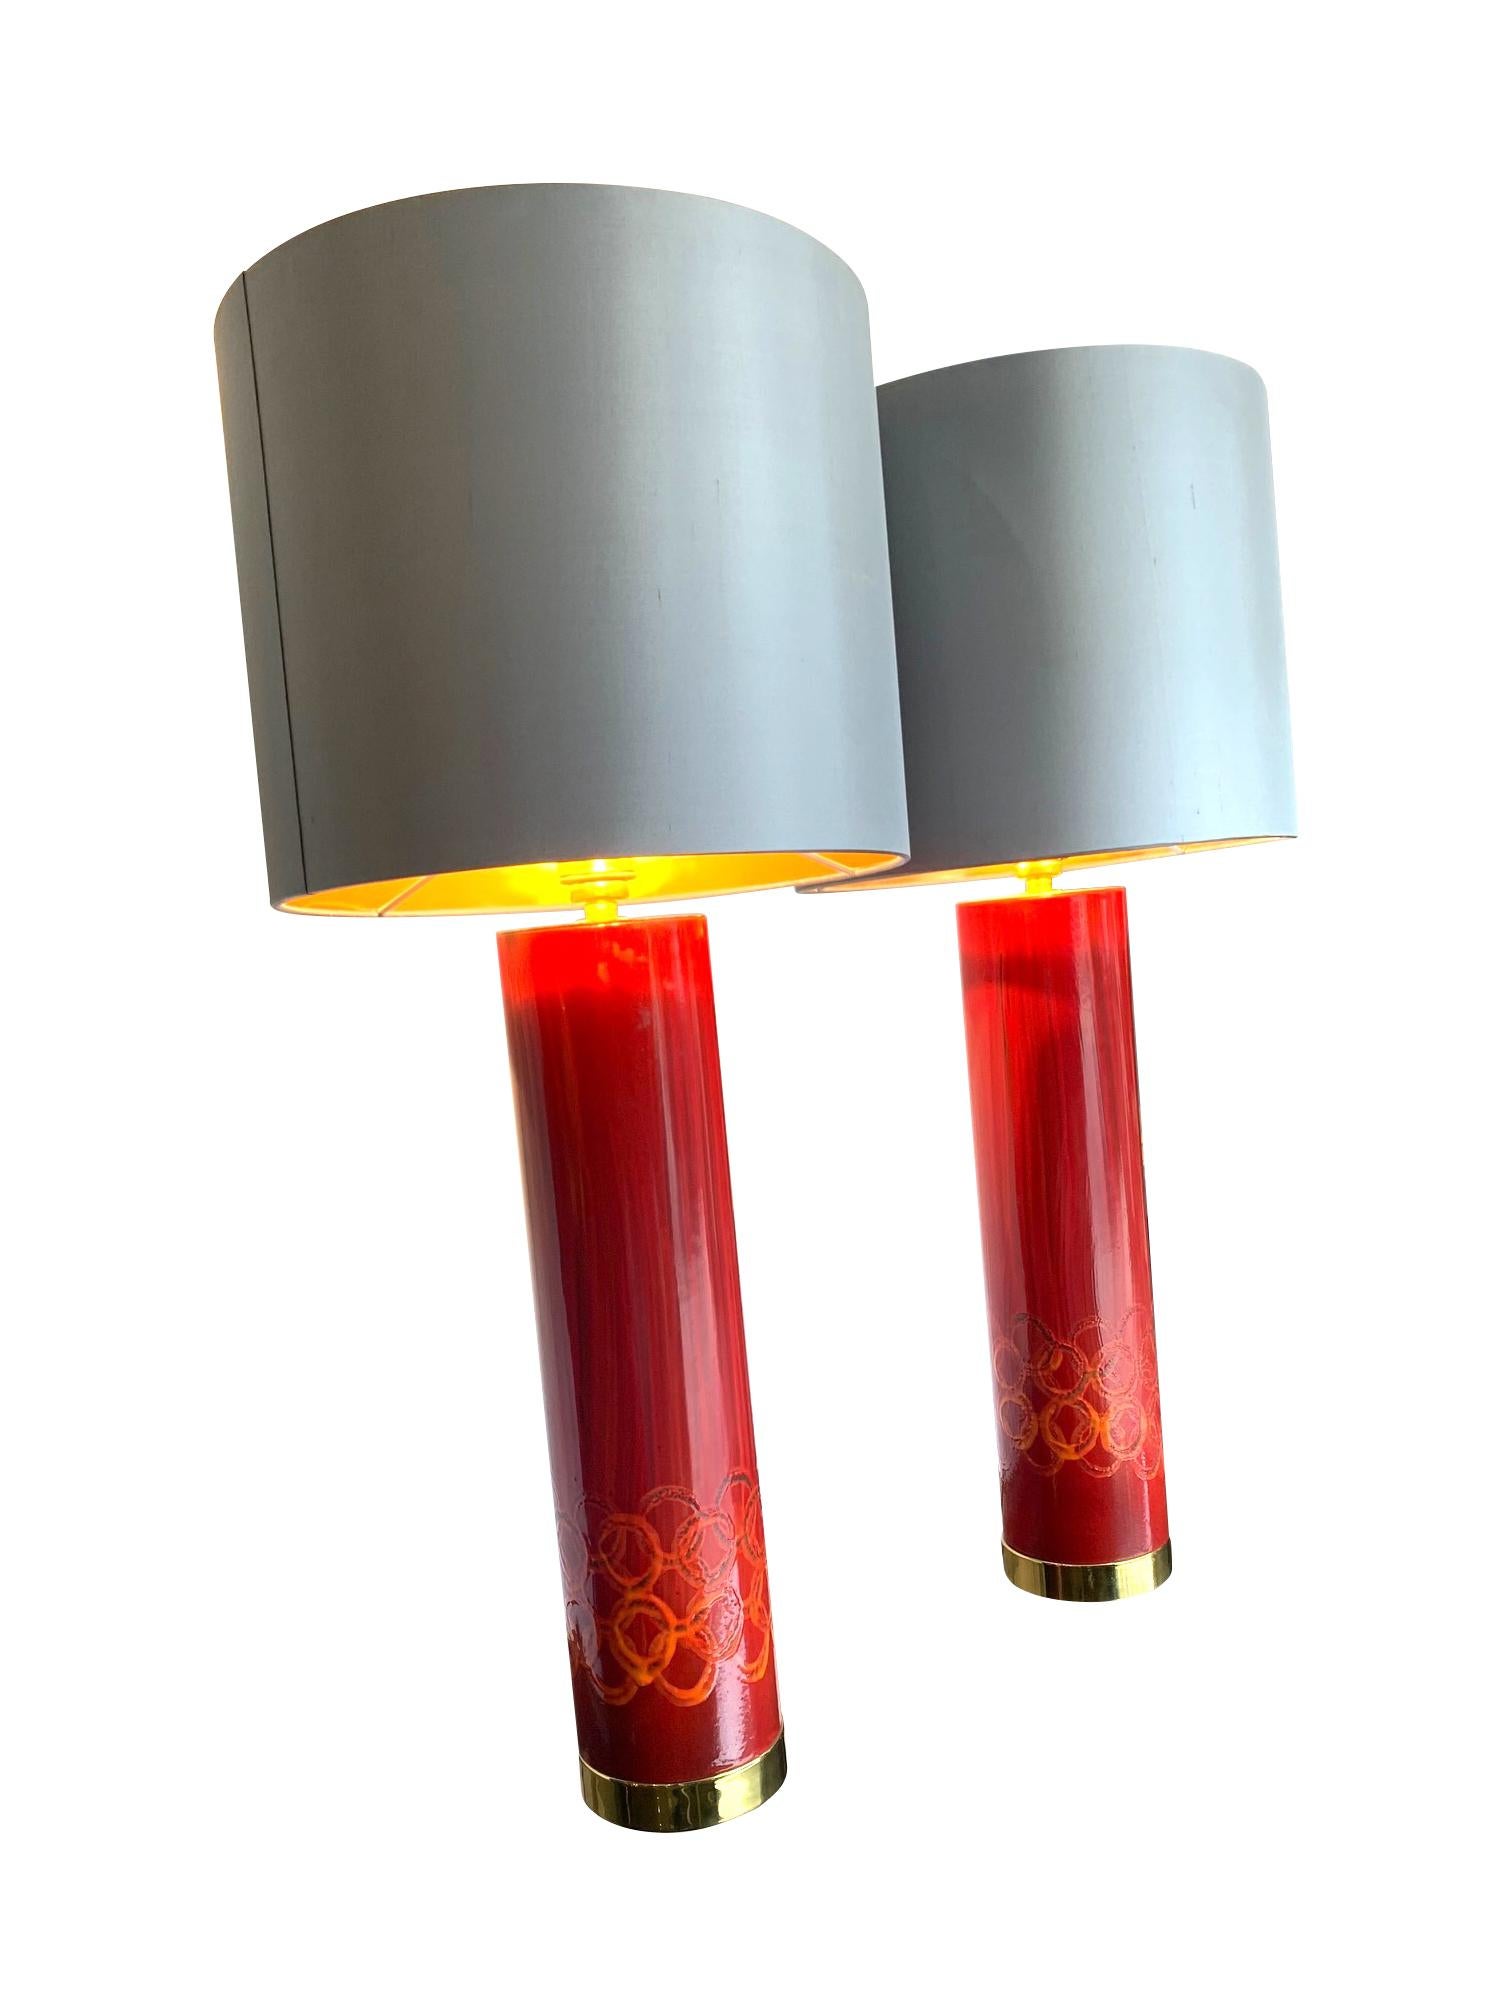 Mid-Century Modern Lovely Pair of Swedish Red Ceramic Lamps Brass Fittings and New Bespoke Shades For Sale